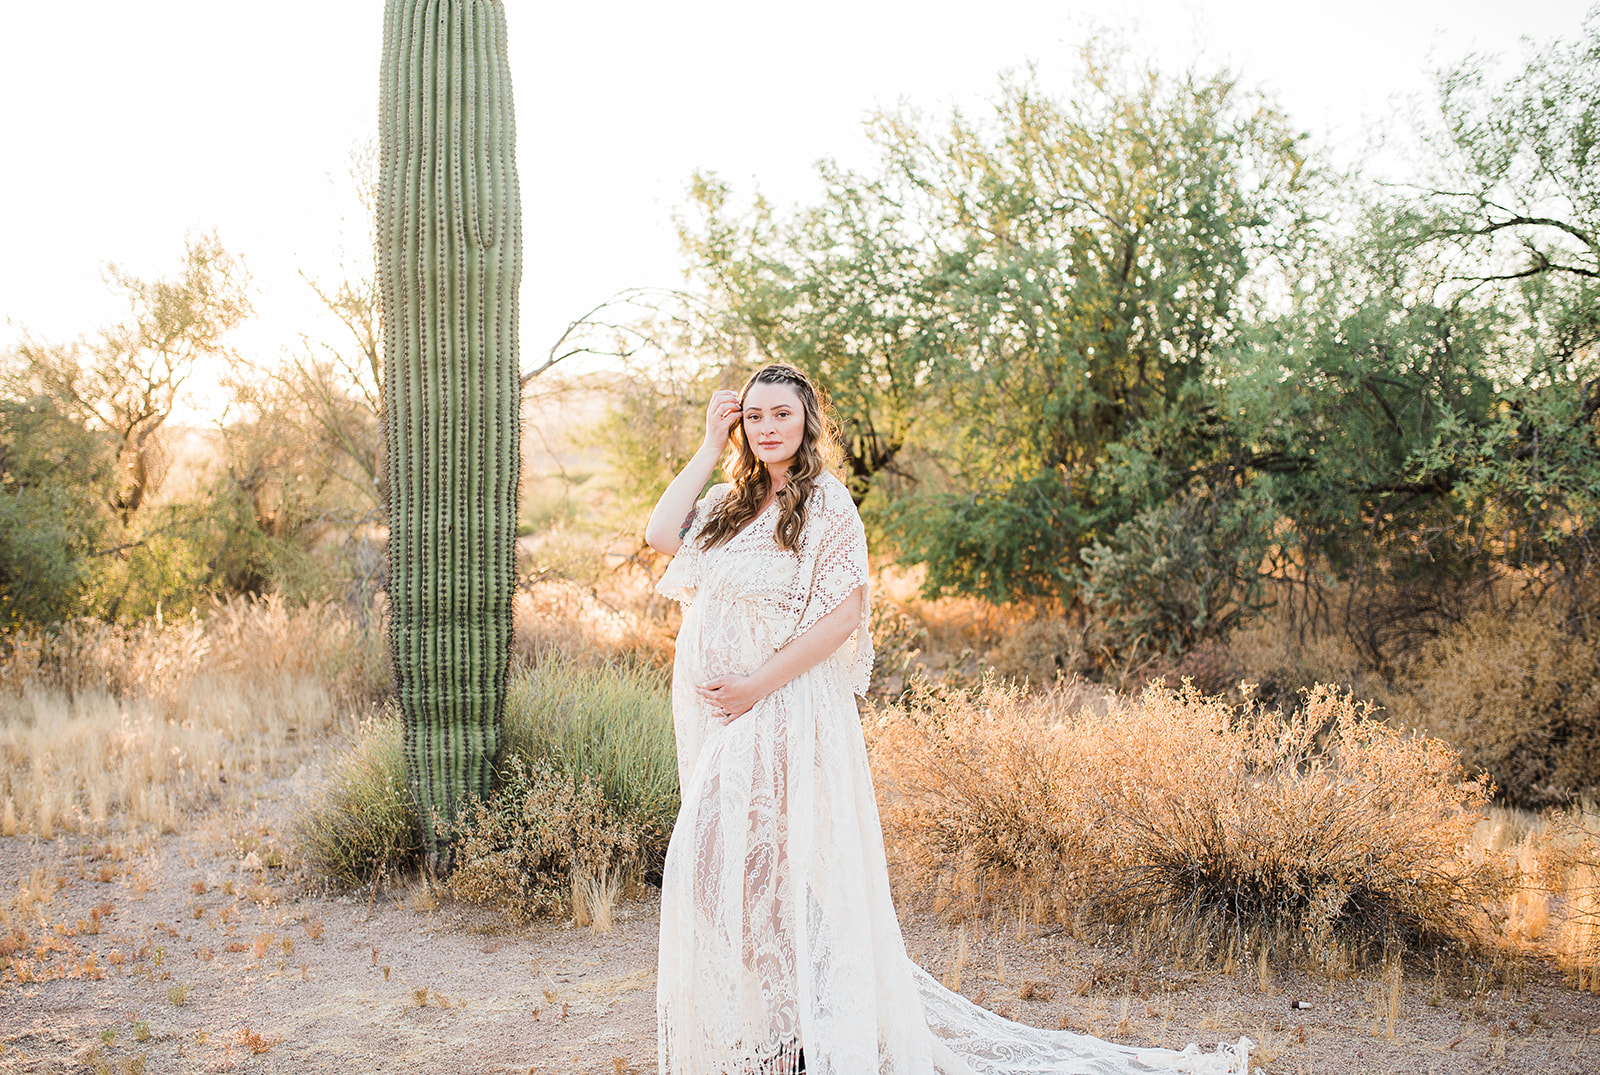 A mother to be pulls back her hair while standing in a desert trail at sunset in a white lace dress after meeting Phoenix midwives